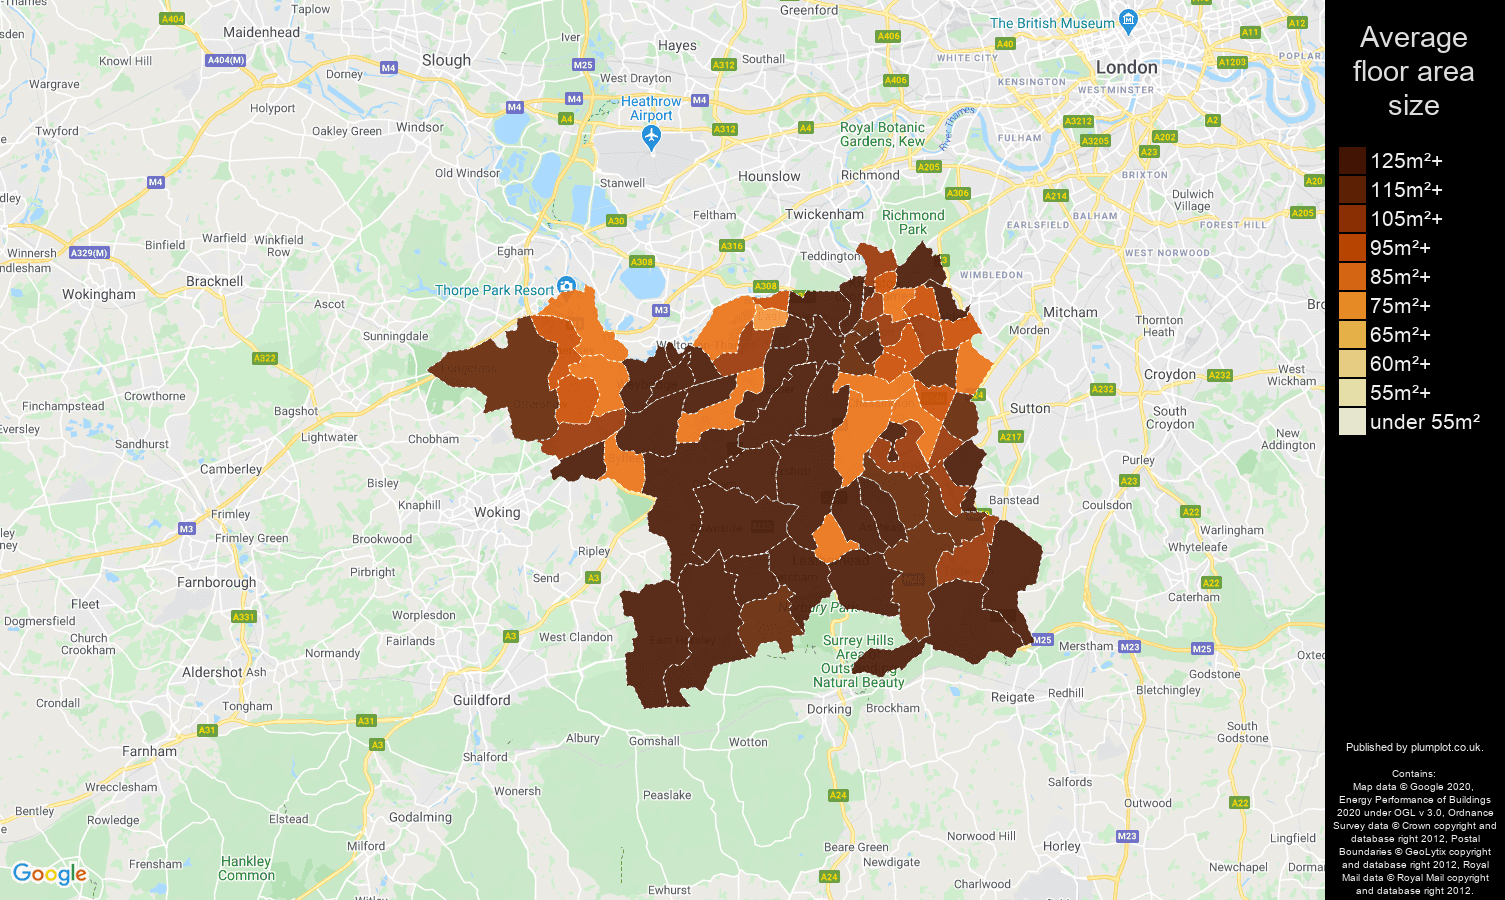 Kingston upon Thames map of average floor area size of houses